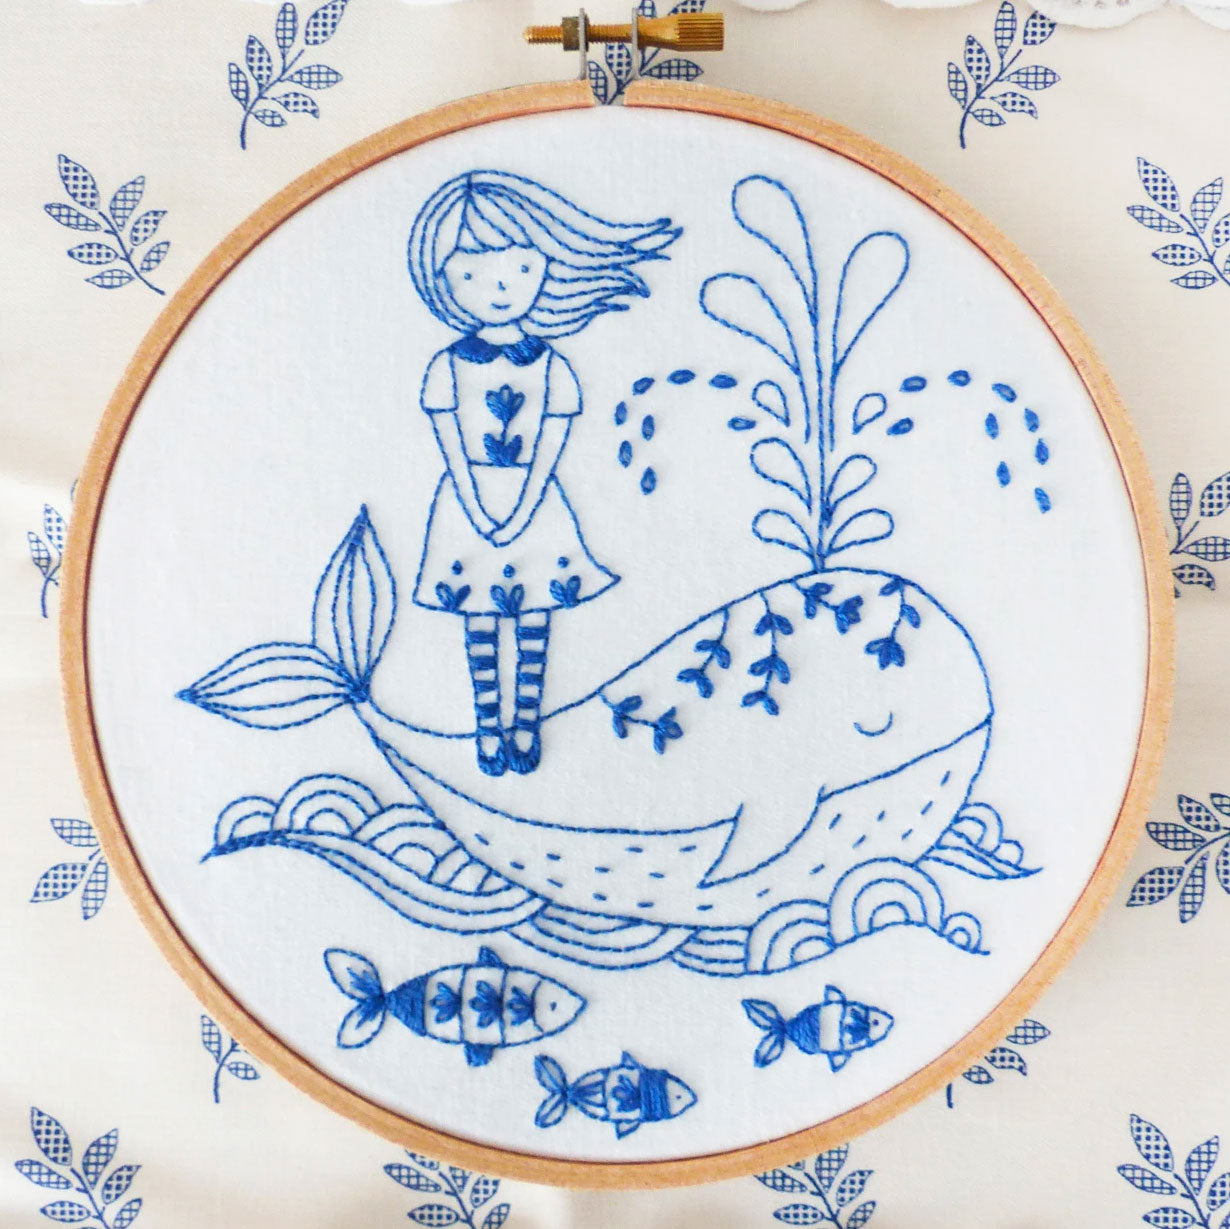 Dreamy Lady Hand Embroidery Kit - Stitched Modern